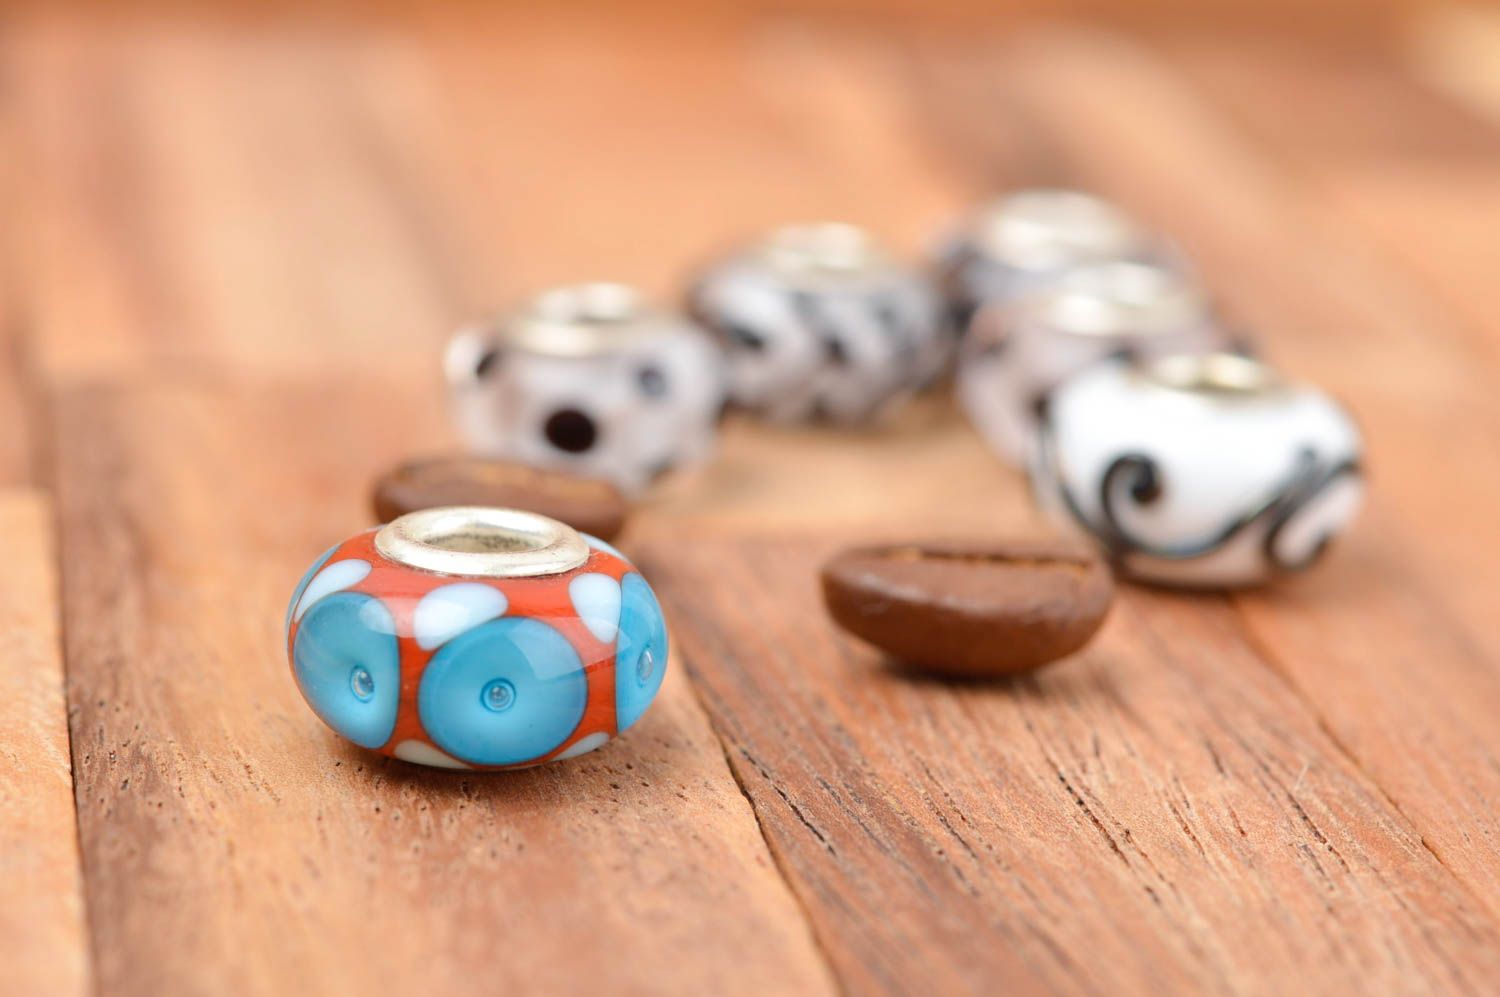 Handmade fittings unusual beads designer accessory jewelry charms gift ideas photo 1